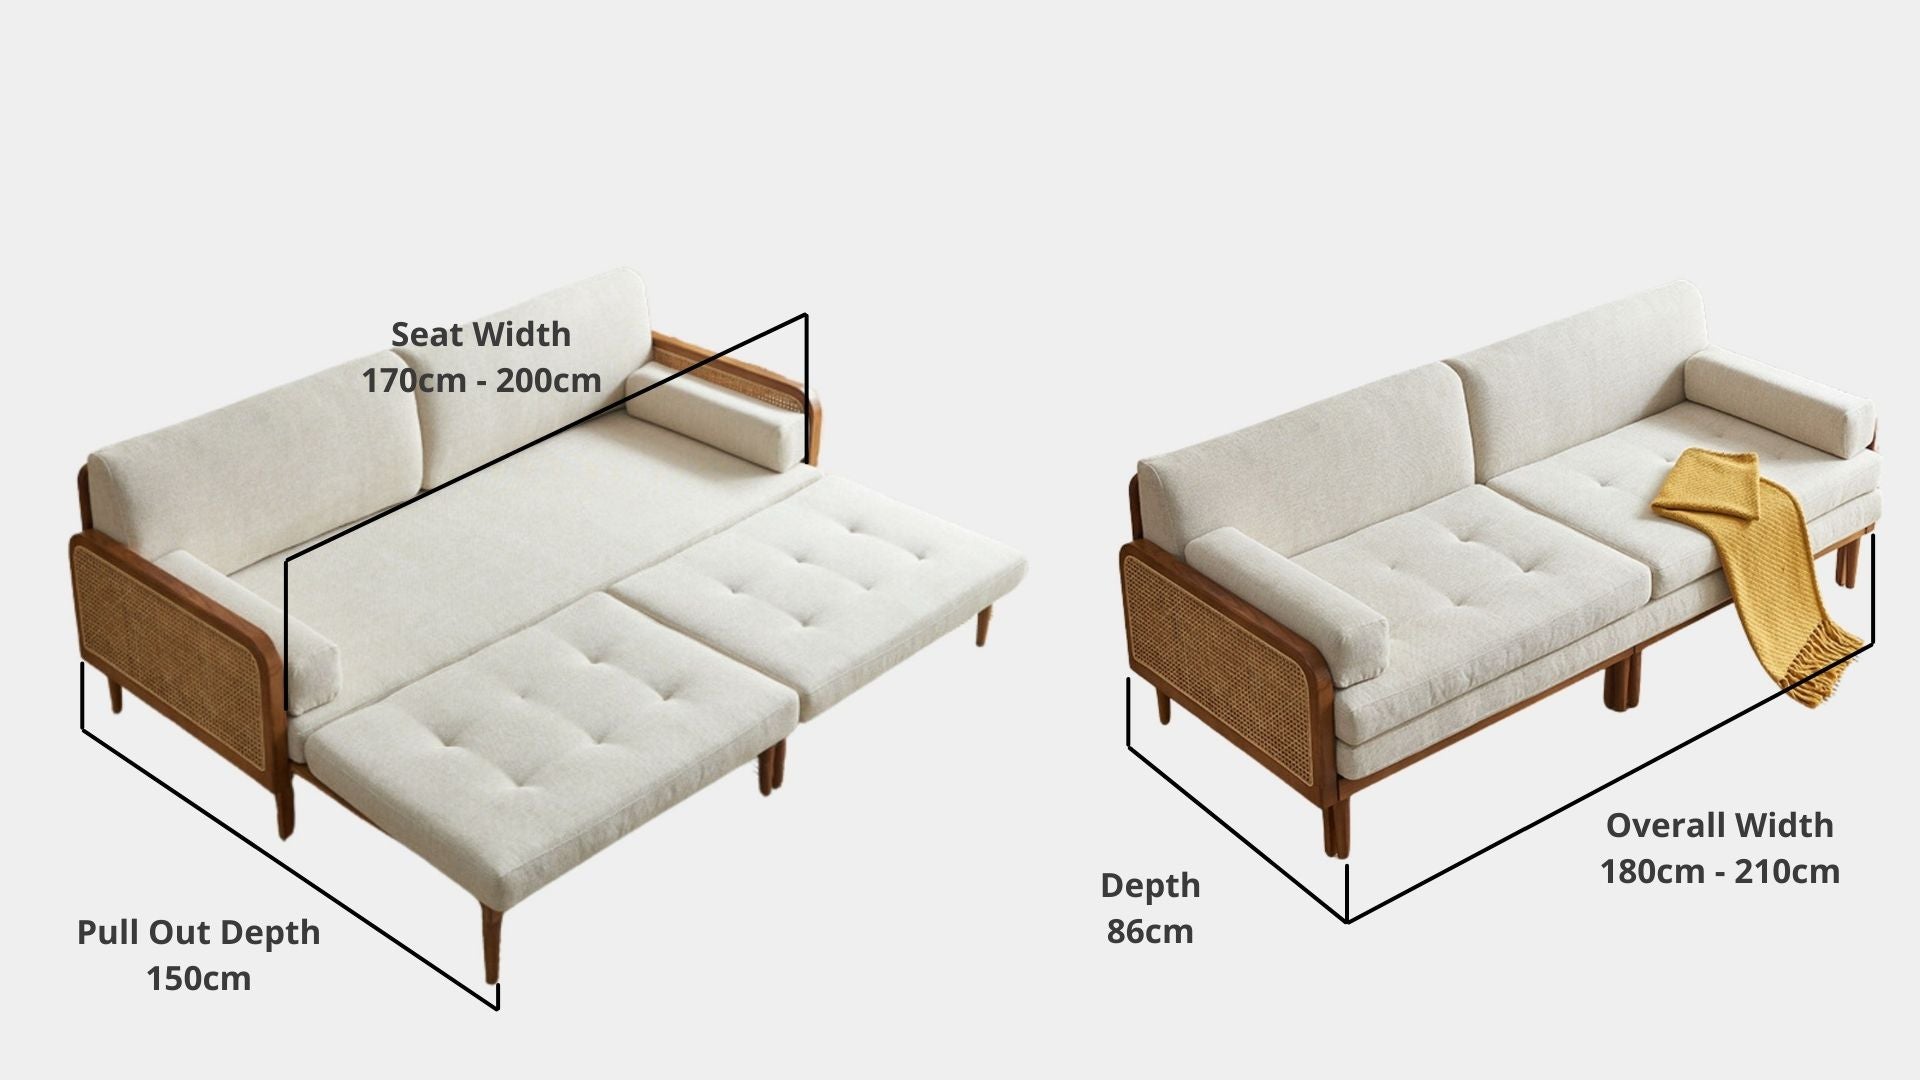 Details the key dimensions in terms of overall width, overall depth and seat width for Cane Fabric Sofa Bed